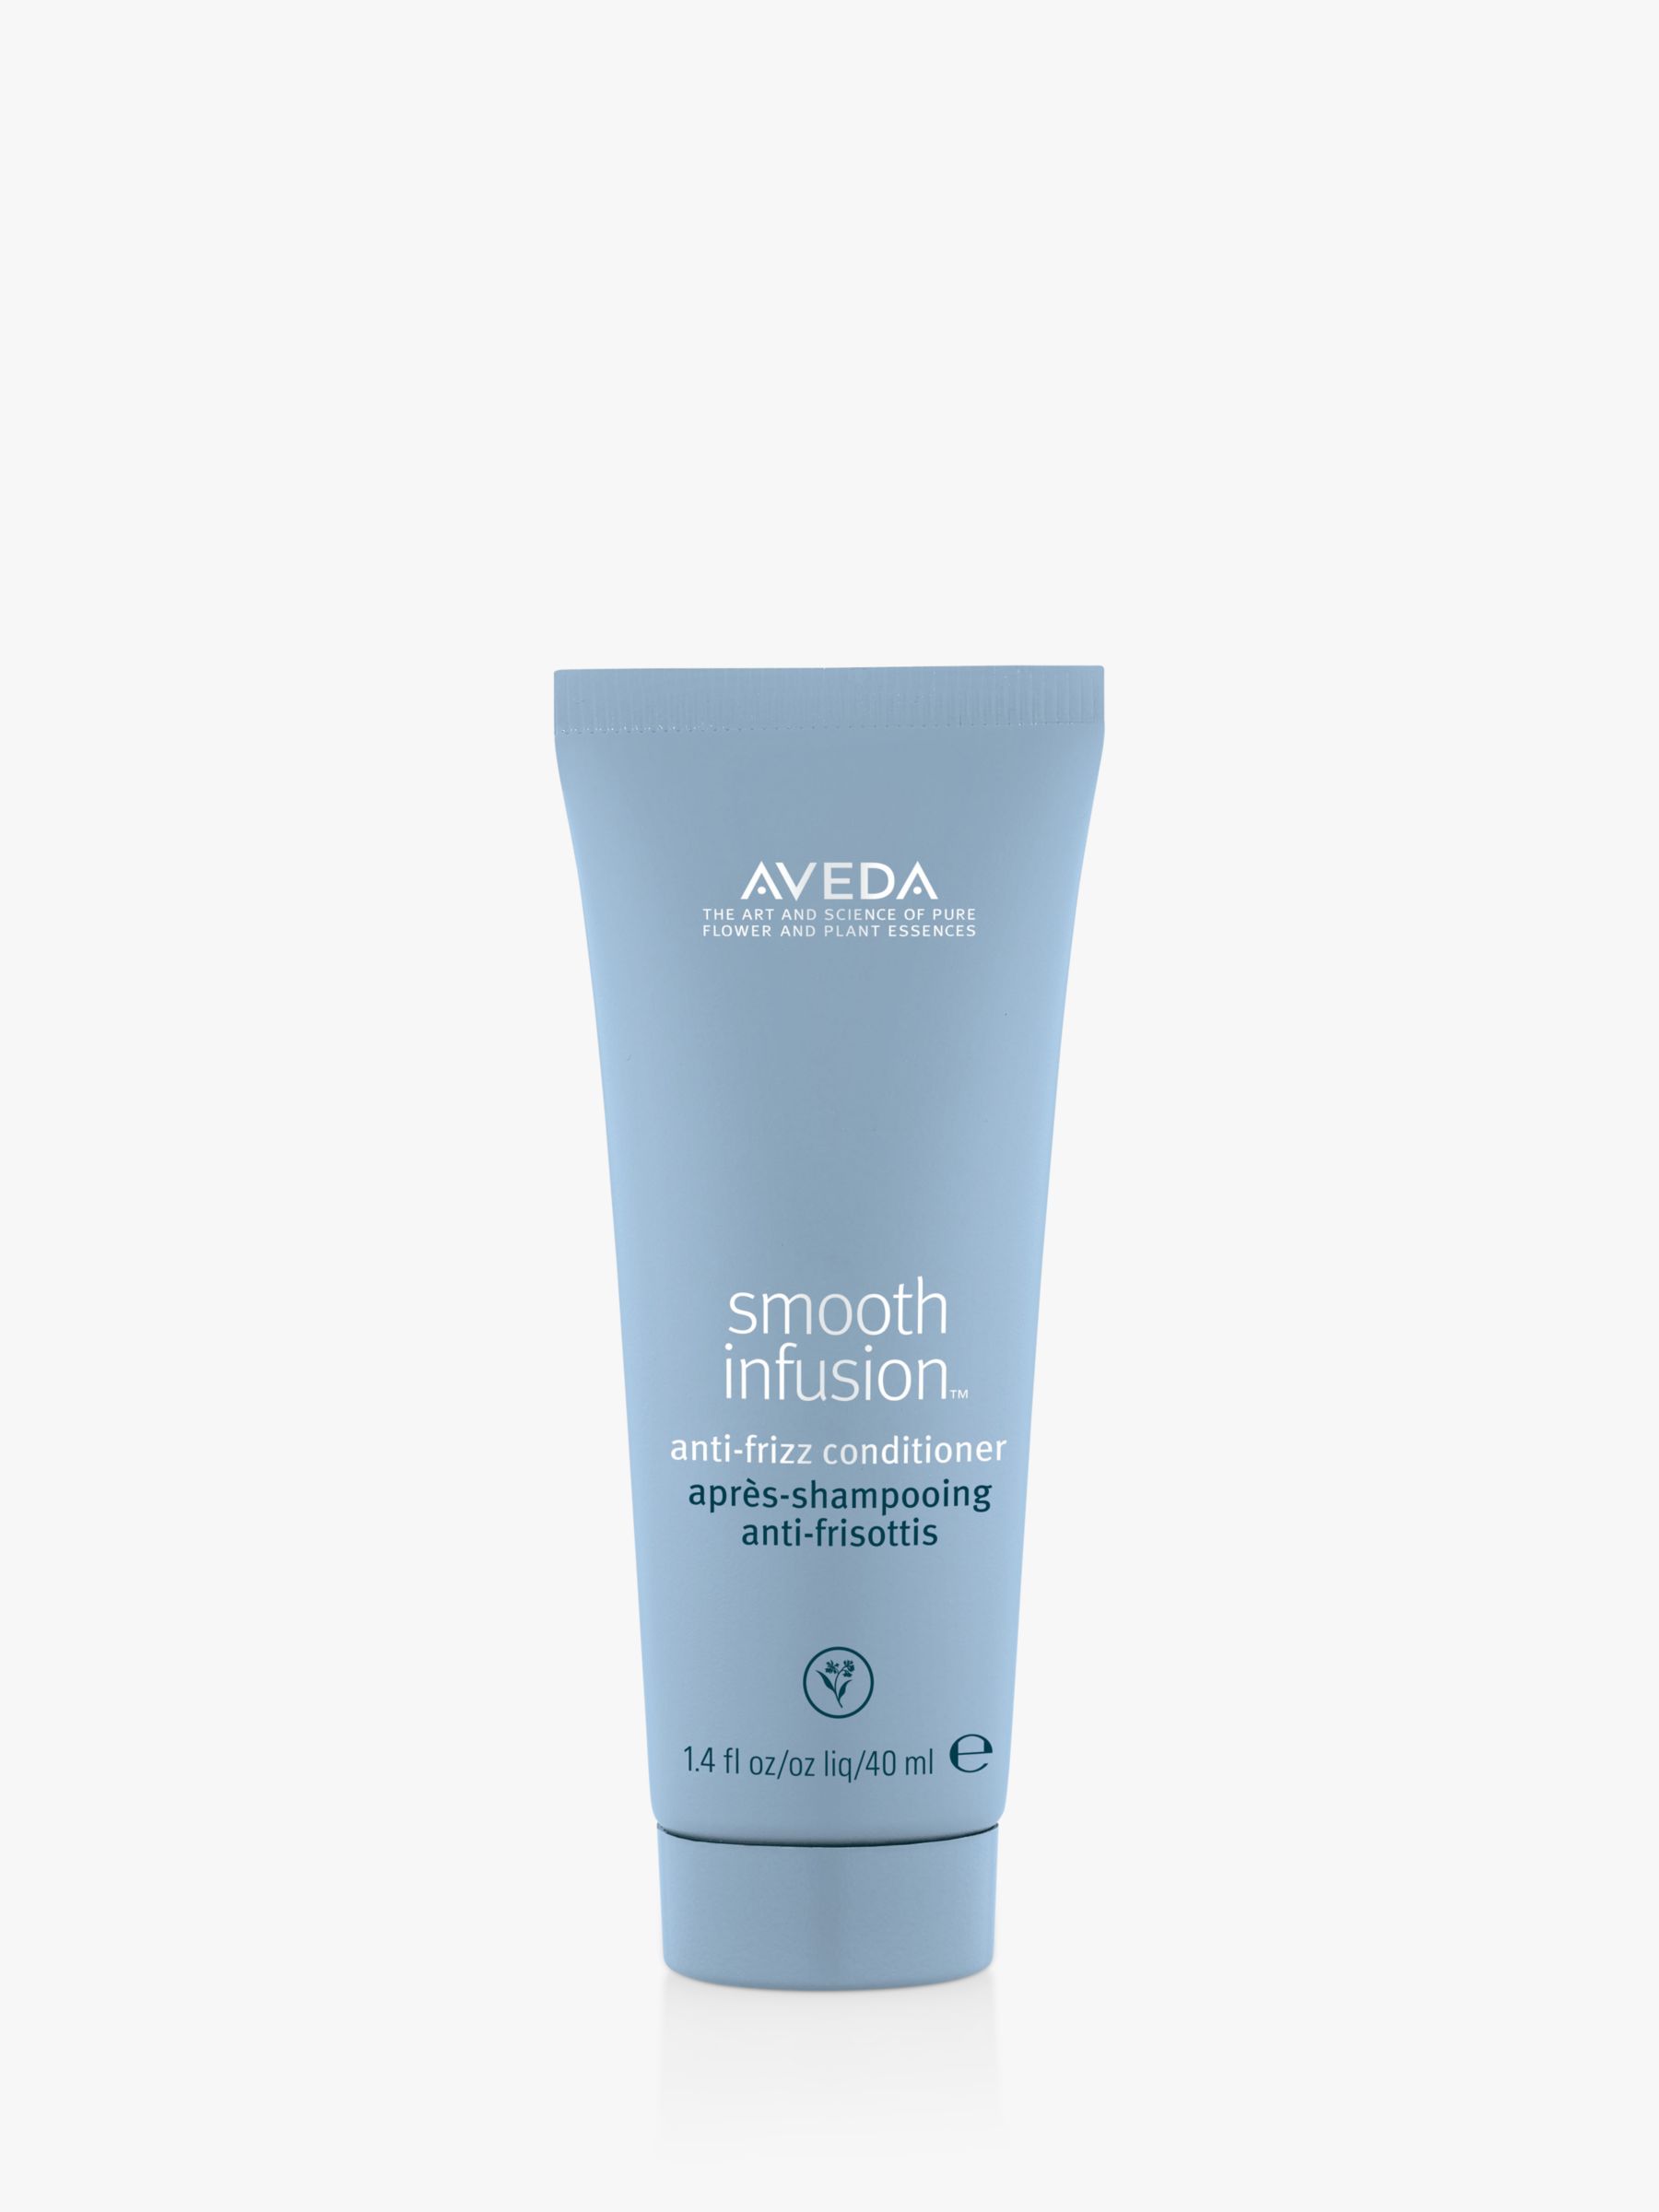 Aveda Smooth Infusion™ Anti-Frizz Conditioner, 40ml